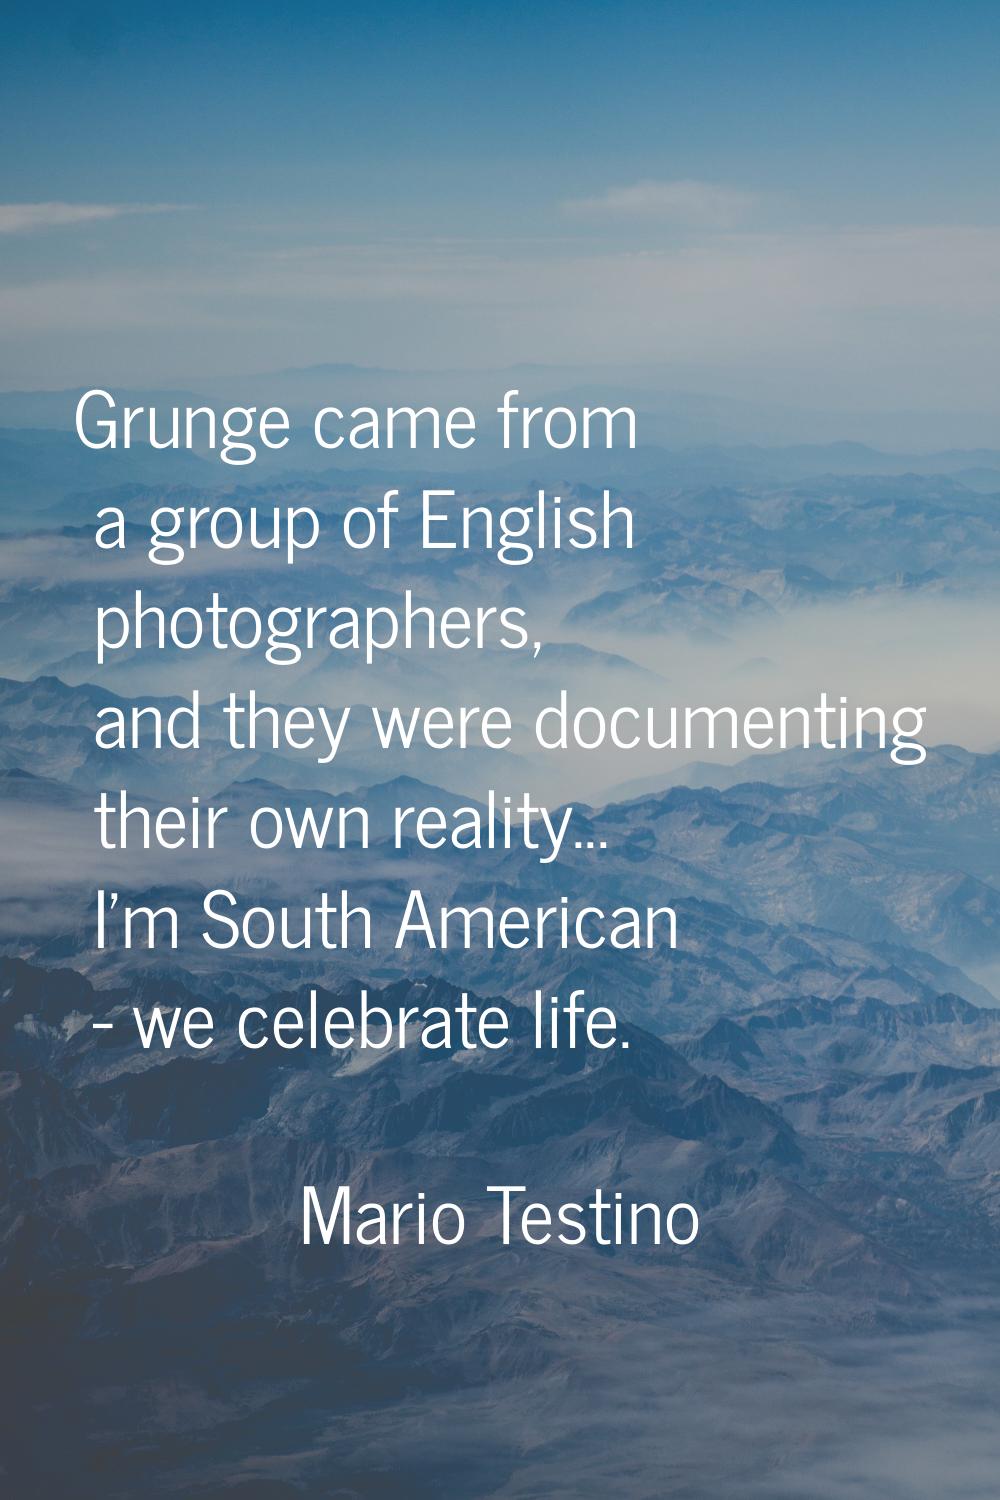 Grunge came from a group of English photographers, and they were documenting their own reality... I